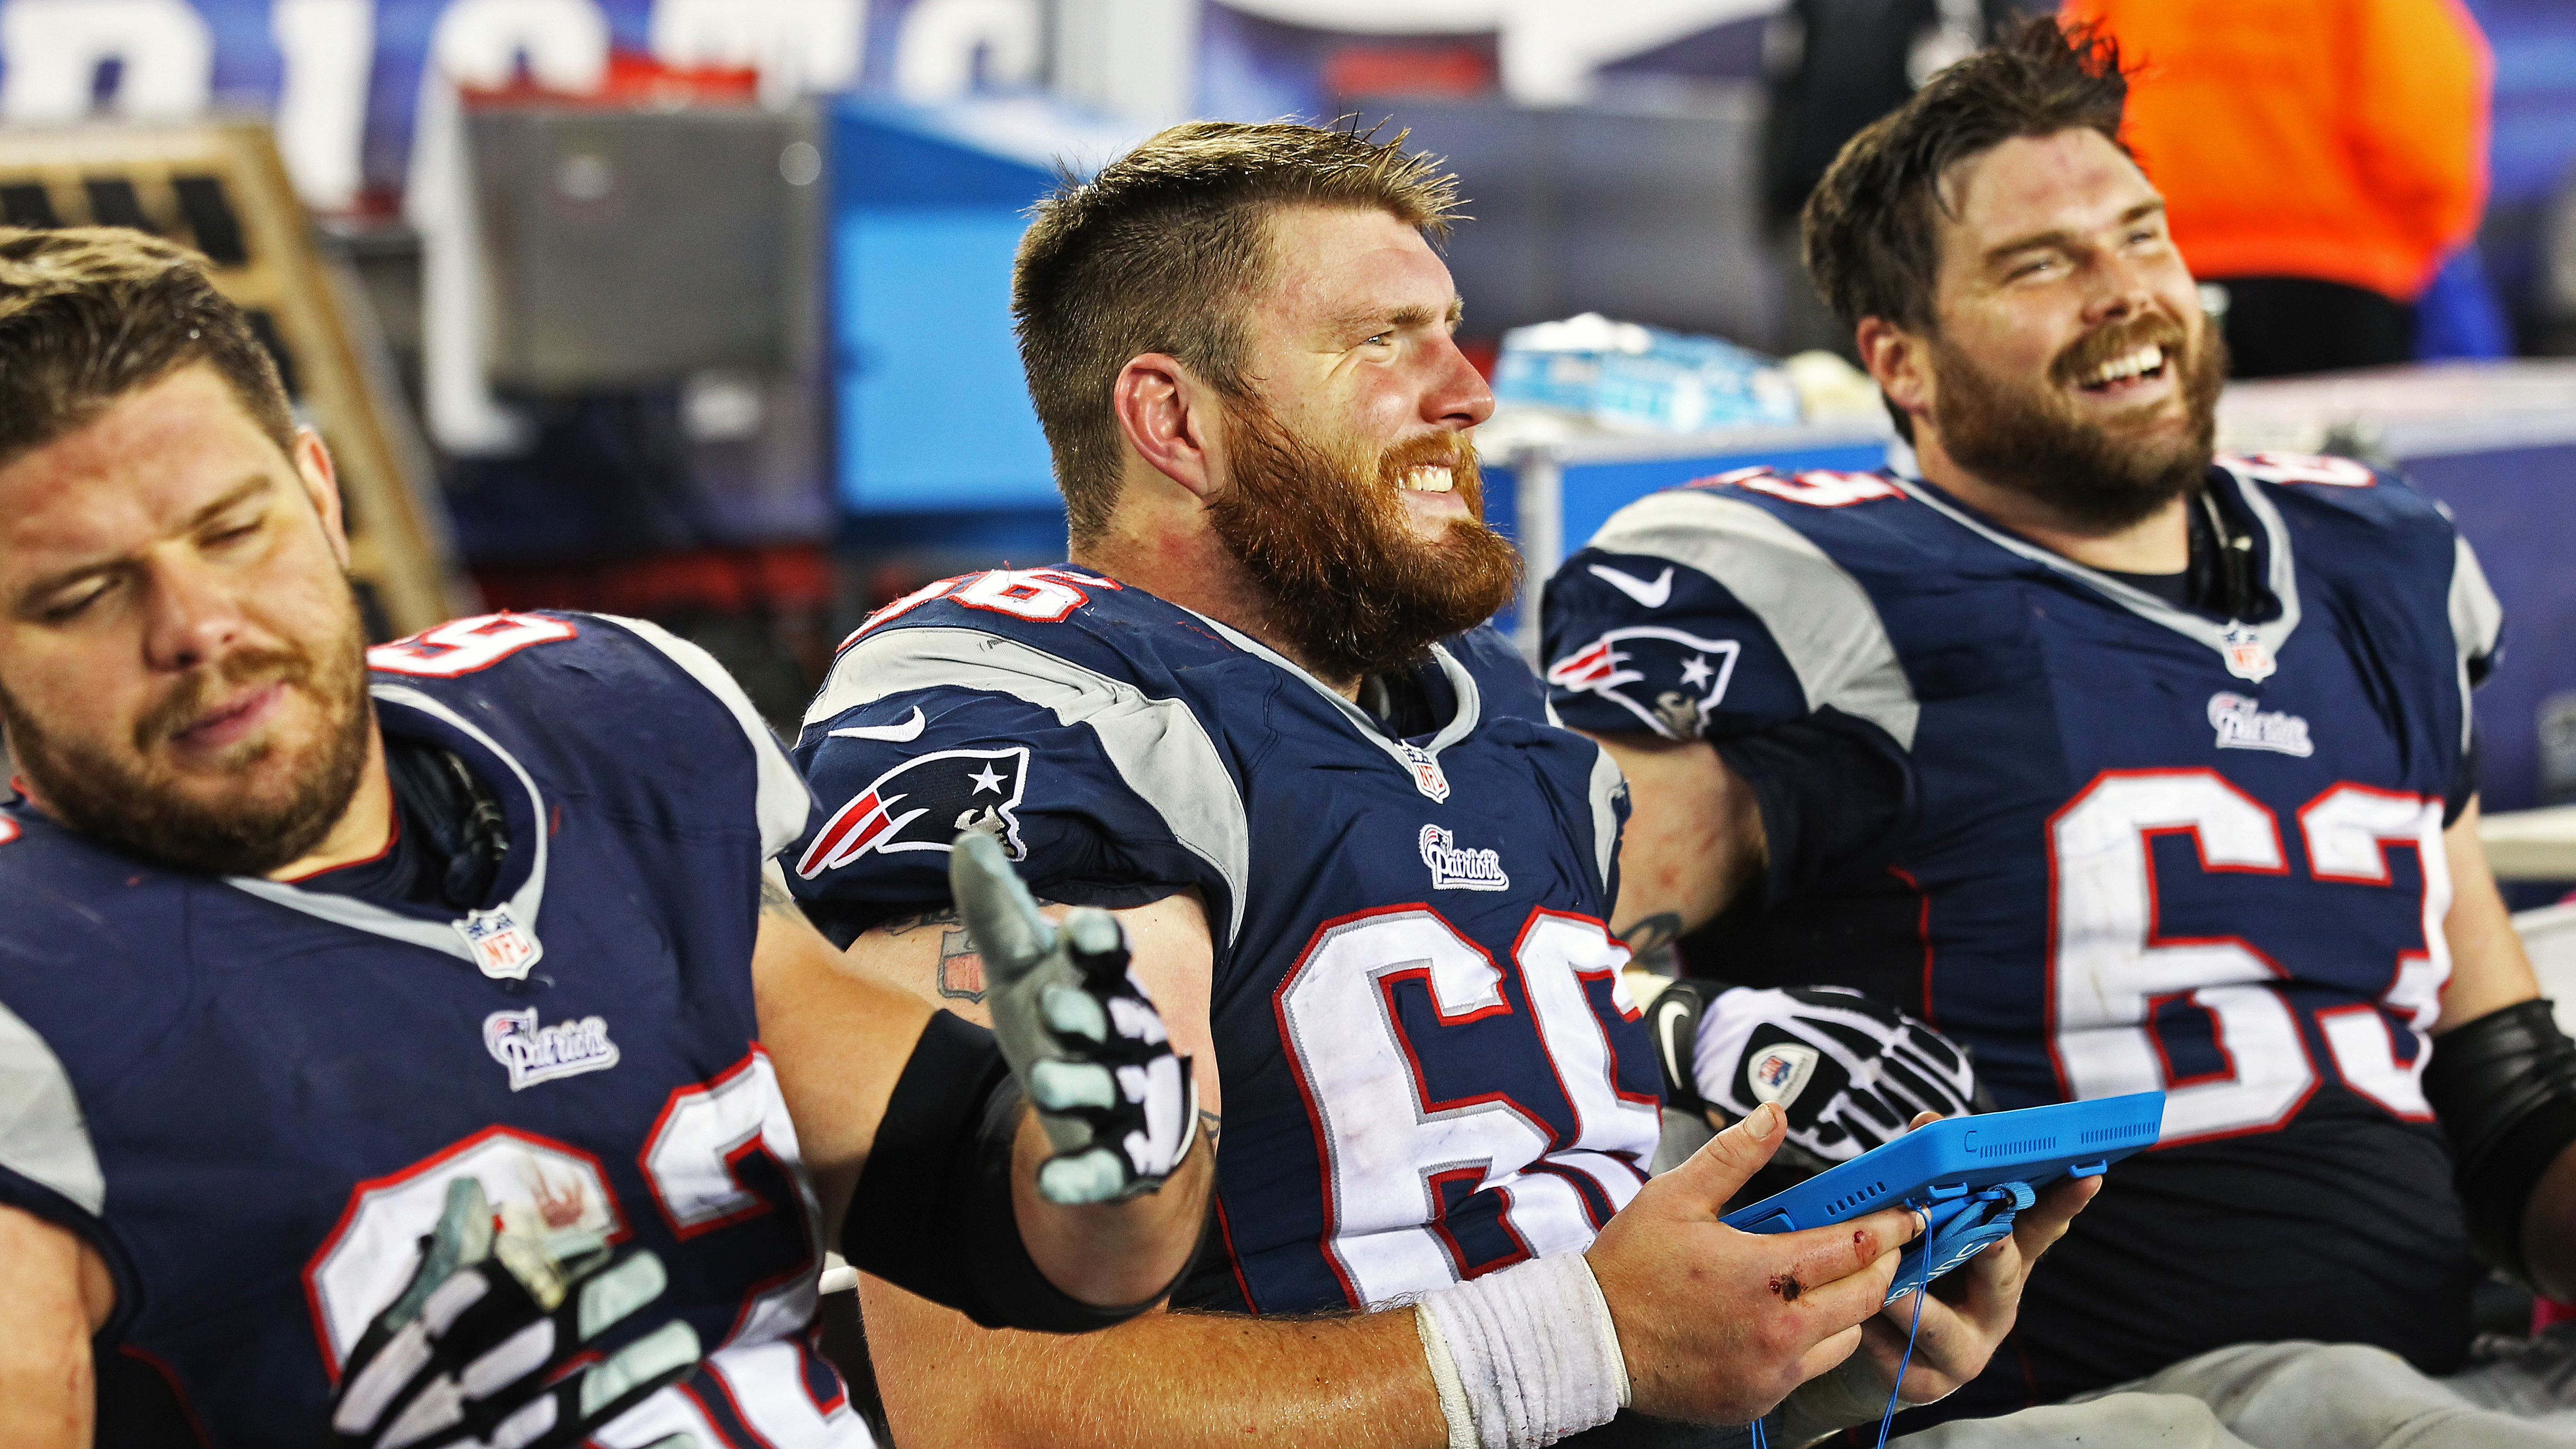 (L to R) Ryan Wendell, Bryan Stork, Dan Connolly  (Photo by Jim Rogash/Getty Images)